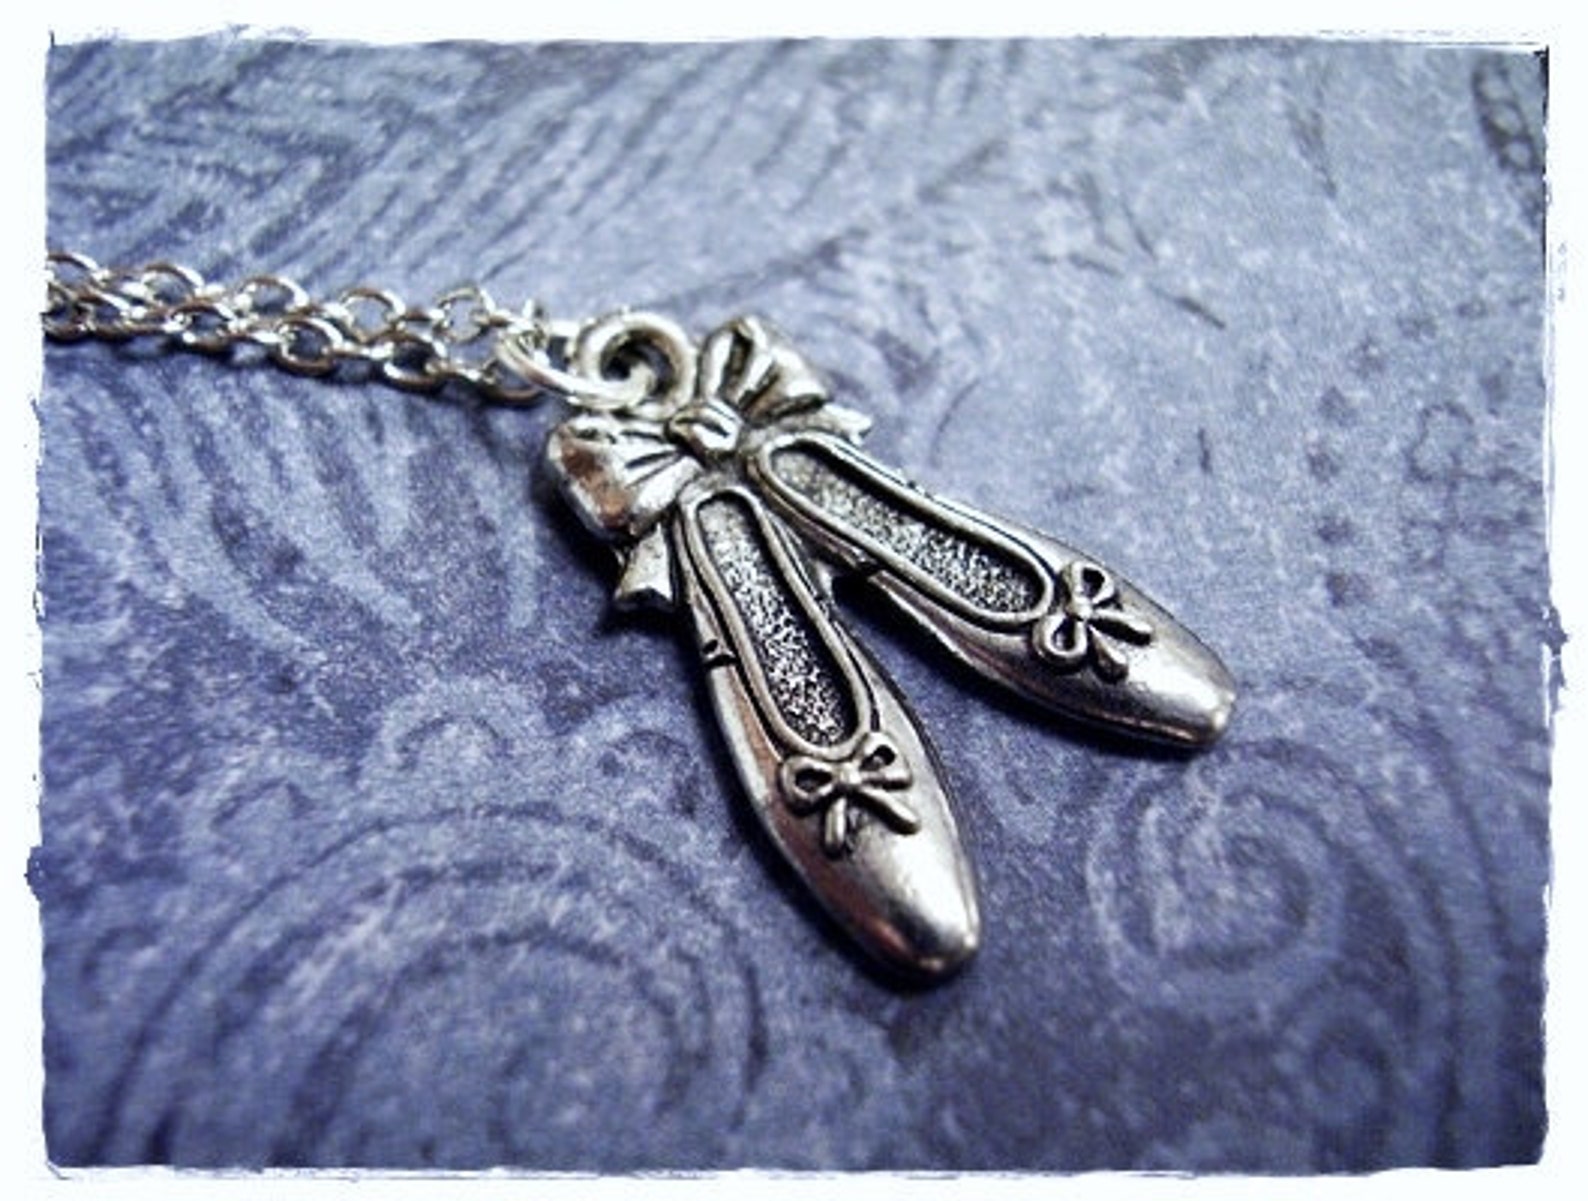 silver ballet slippers necklace - antique pewter ballet slippers charm on a delicate silver plated cable chain or charm only